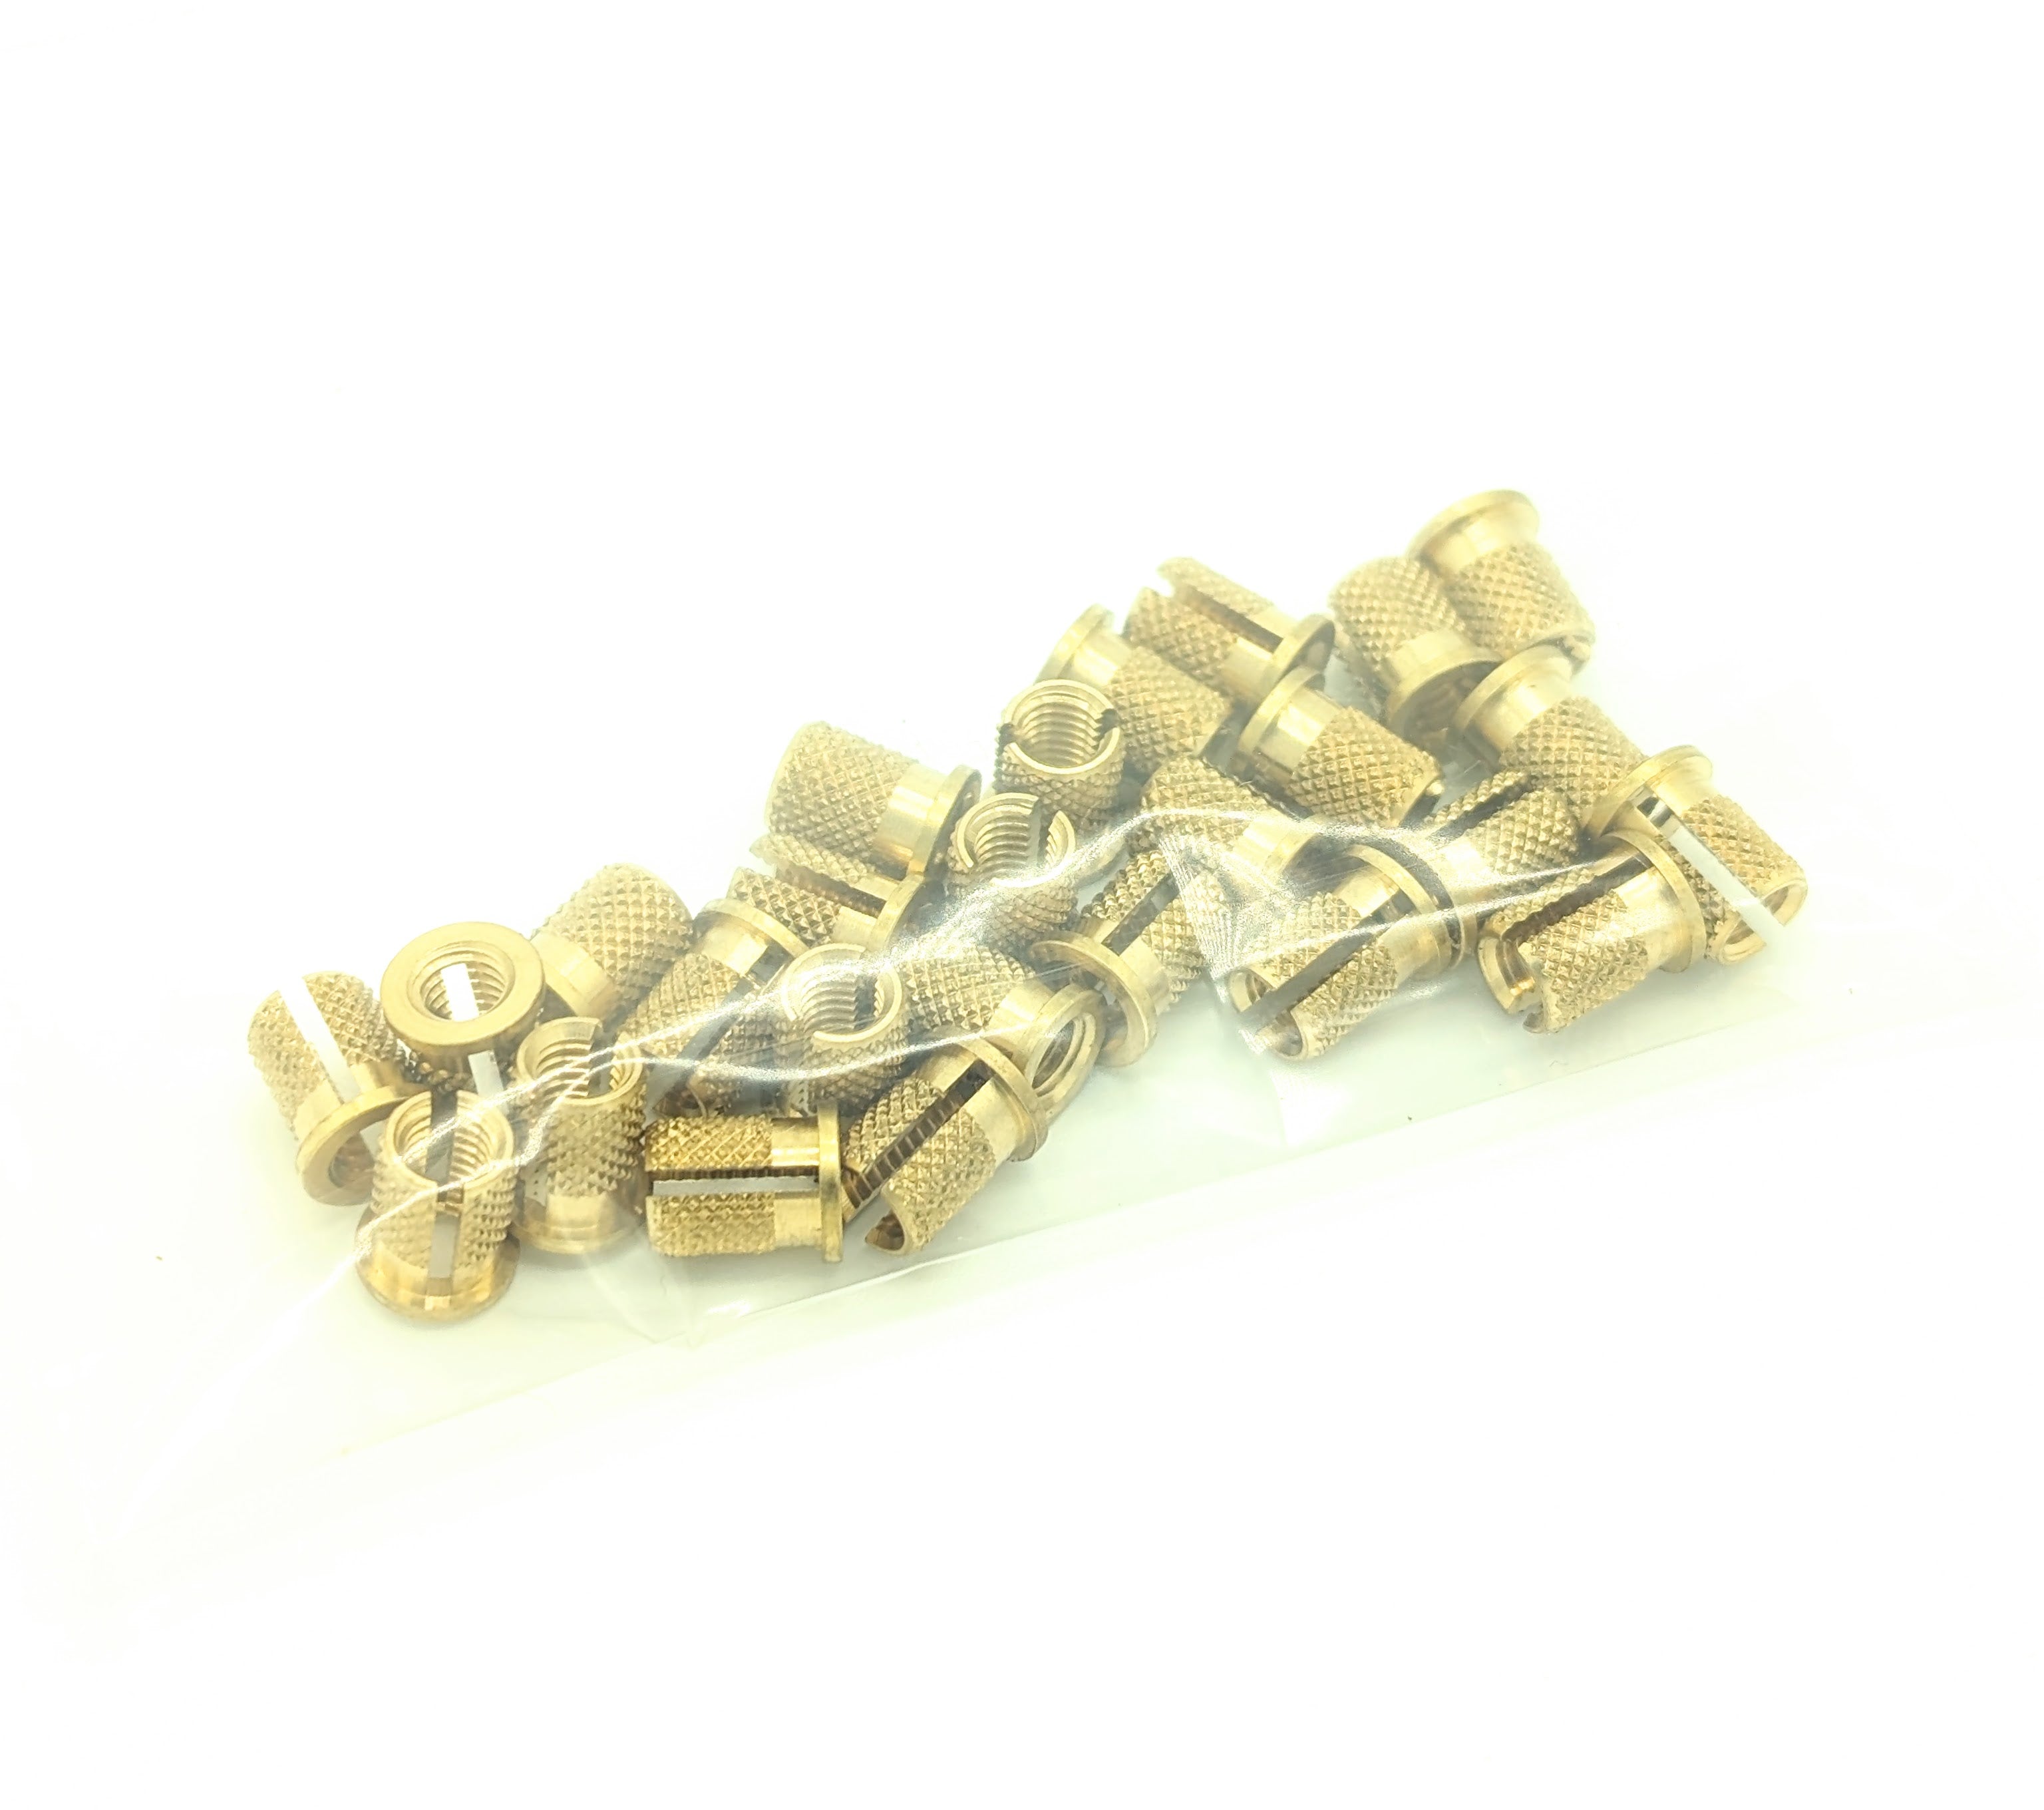 QTY 25 - 10-32 Brass Flanged Screw-to-Expand Inserts for Plastic